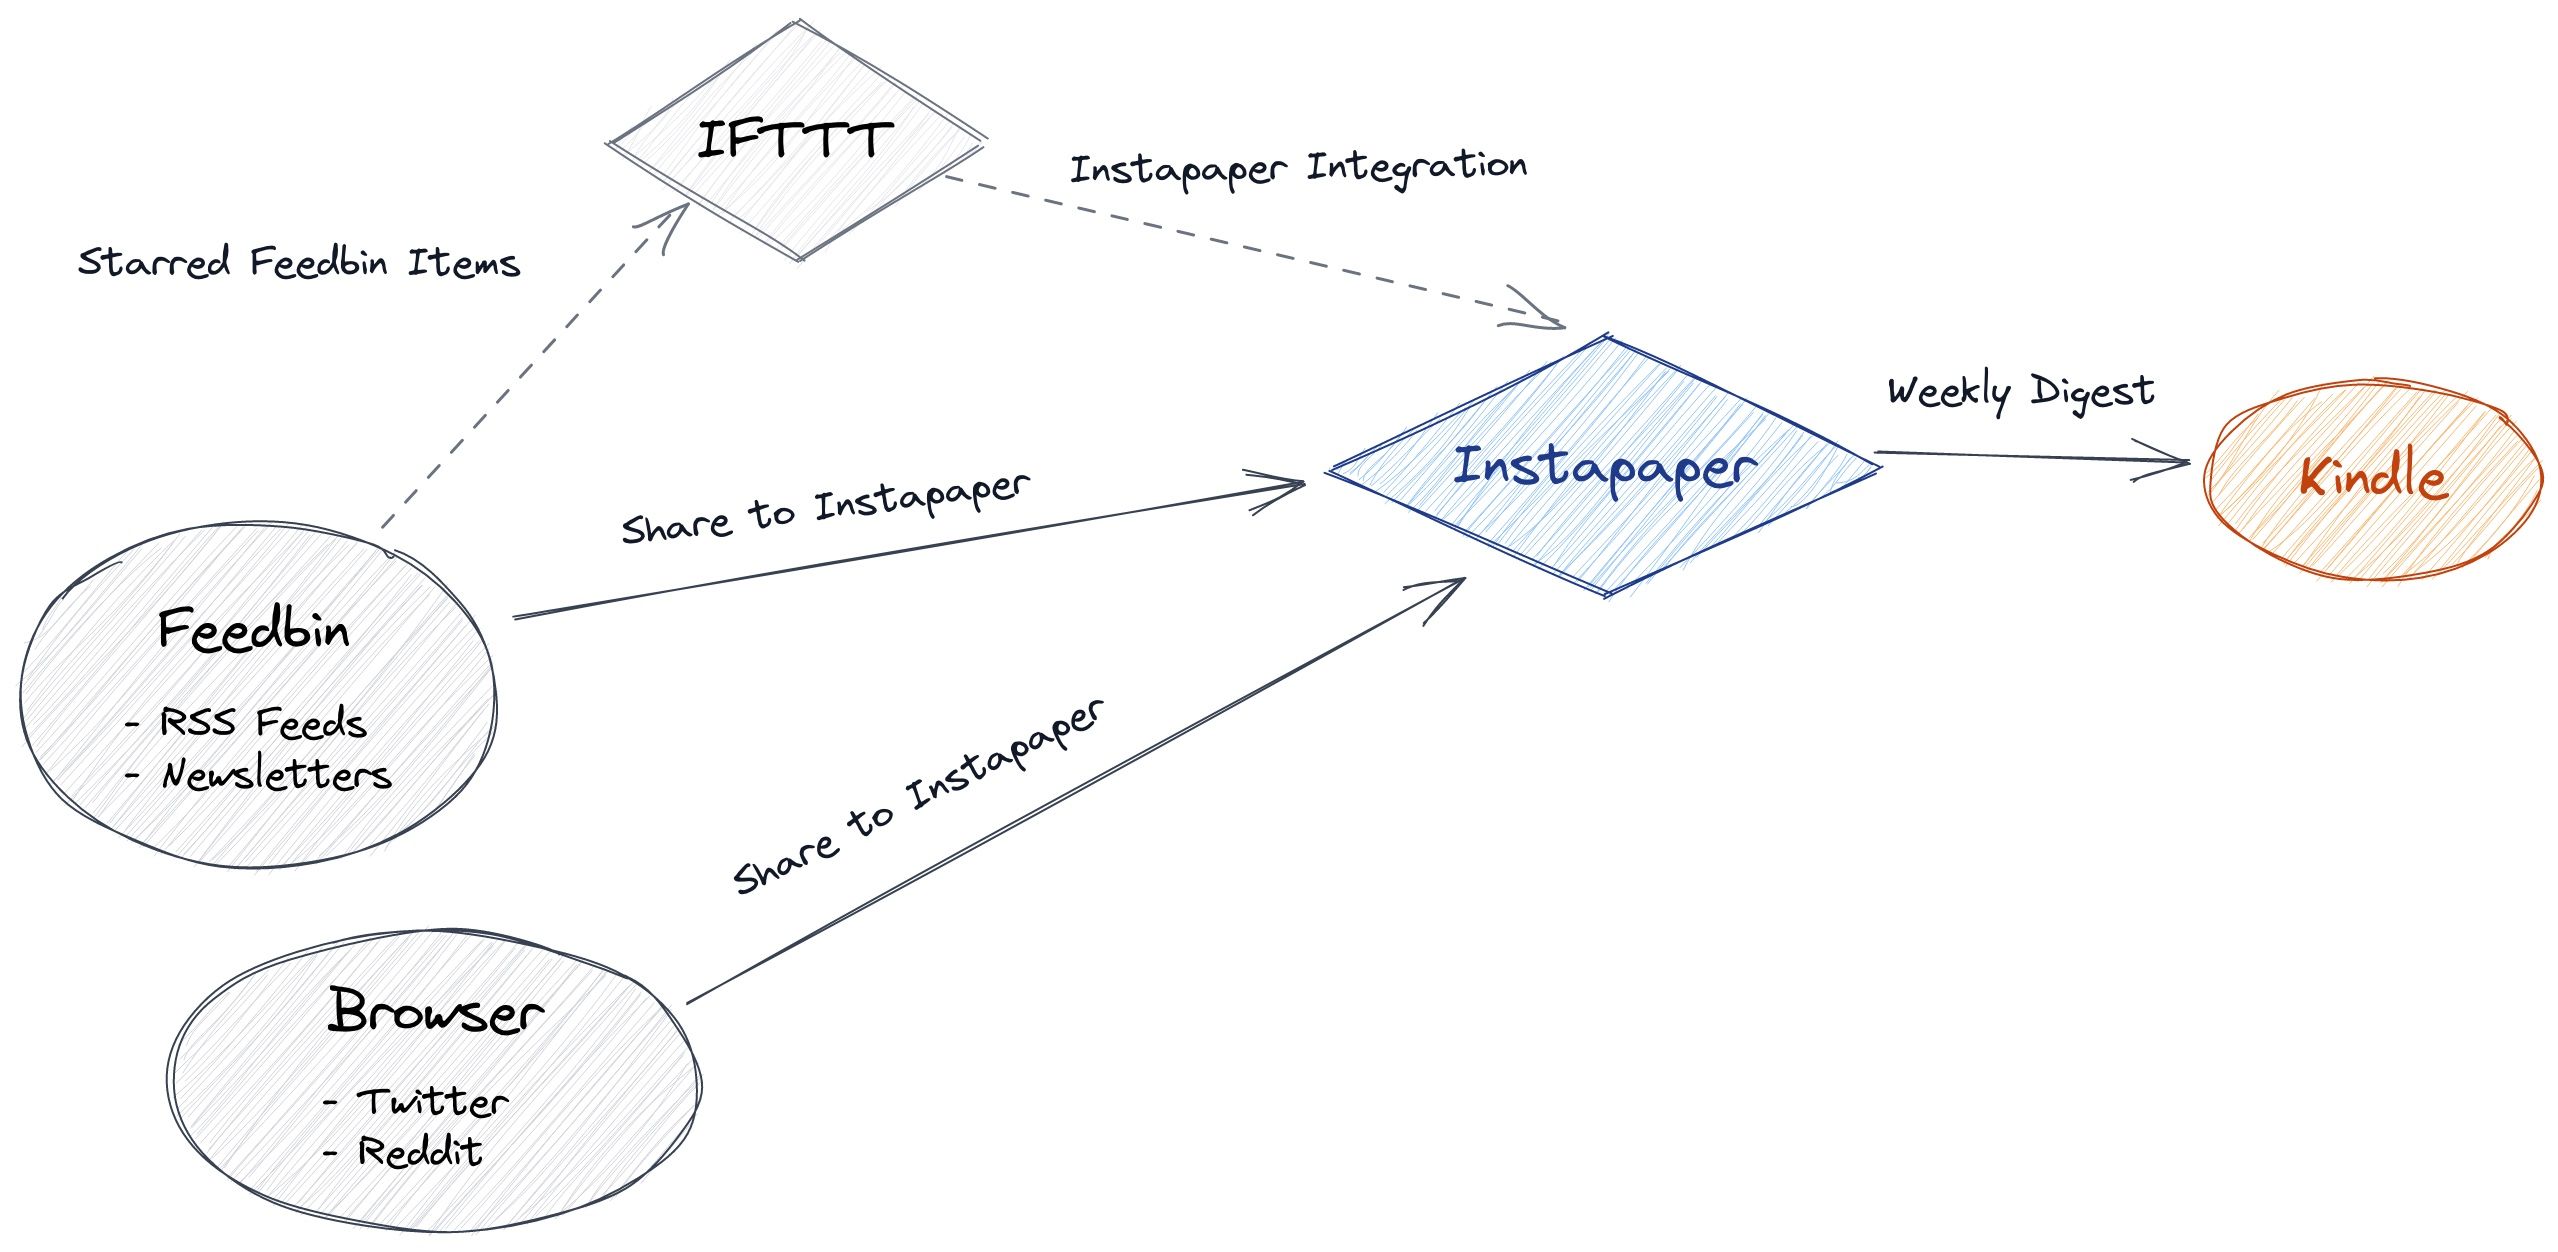 Diagram showcasing how my Boring Reading Stack is built together. It shows connections between Feedbin and Instapaper and my Browser and Instapaper. The final connection is between Instapaper and Kindle.